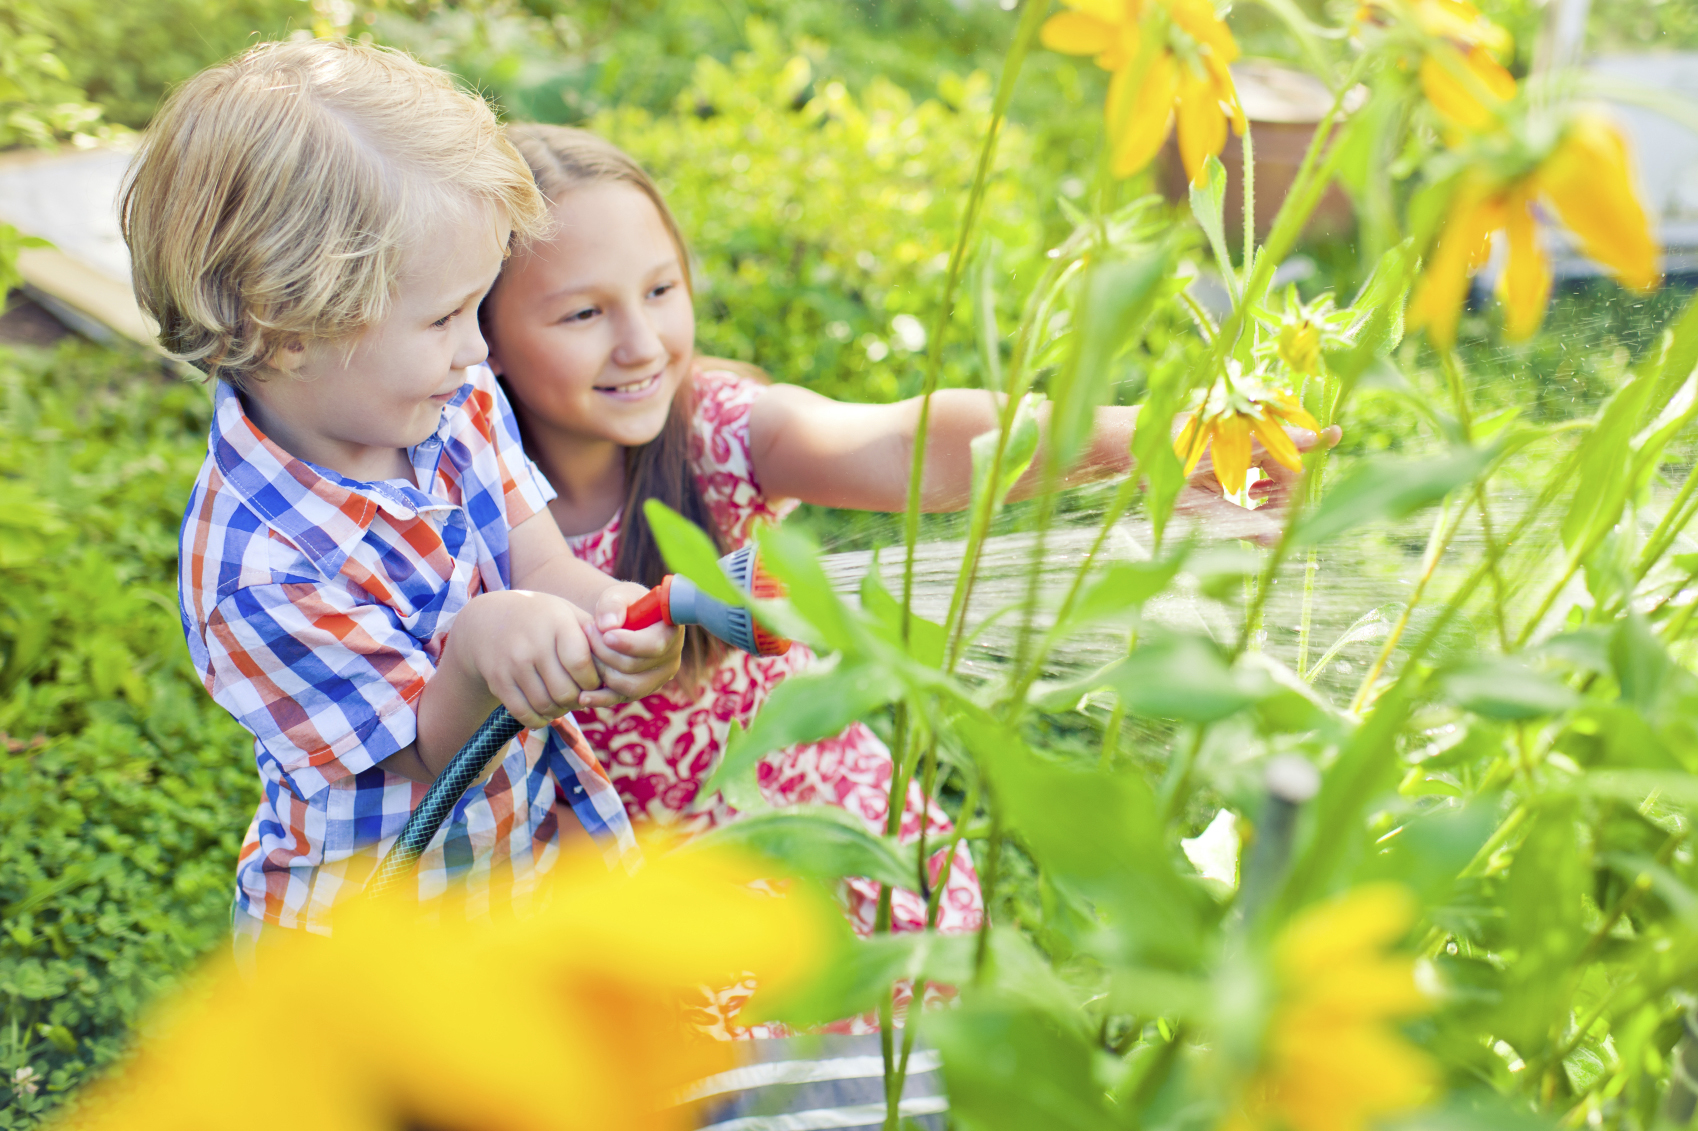 Two children water a garden together with bright yellow flowers.